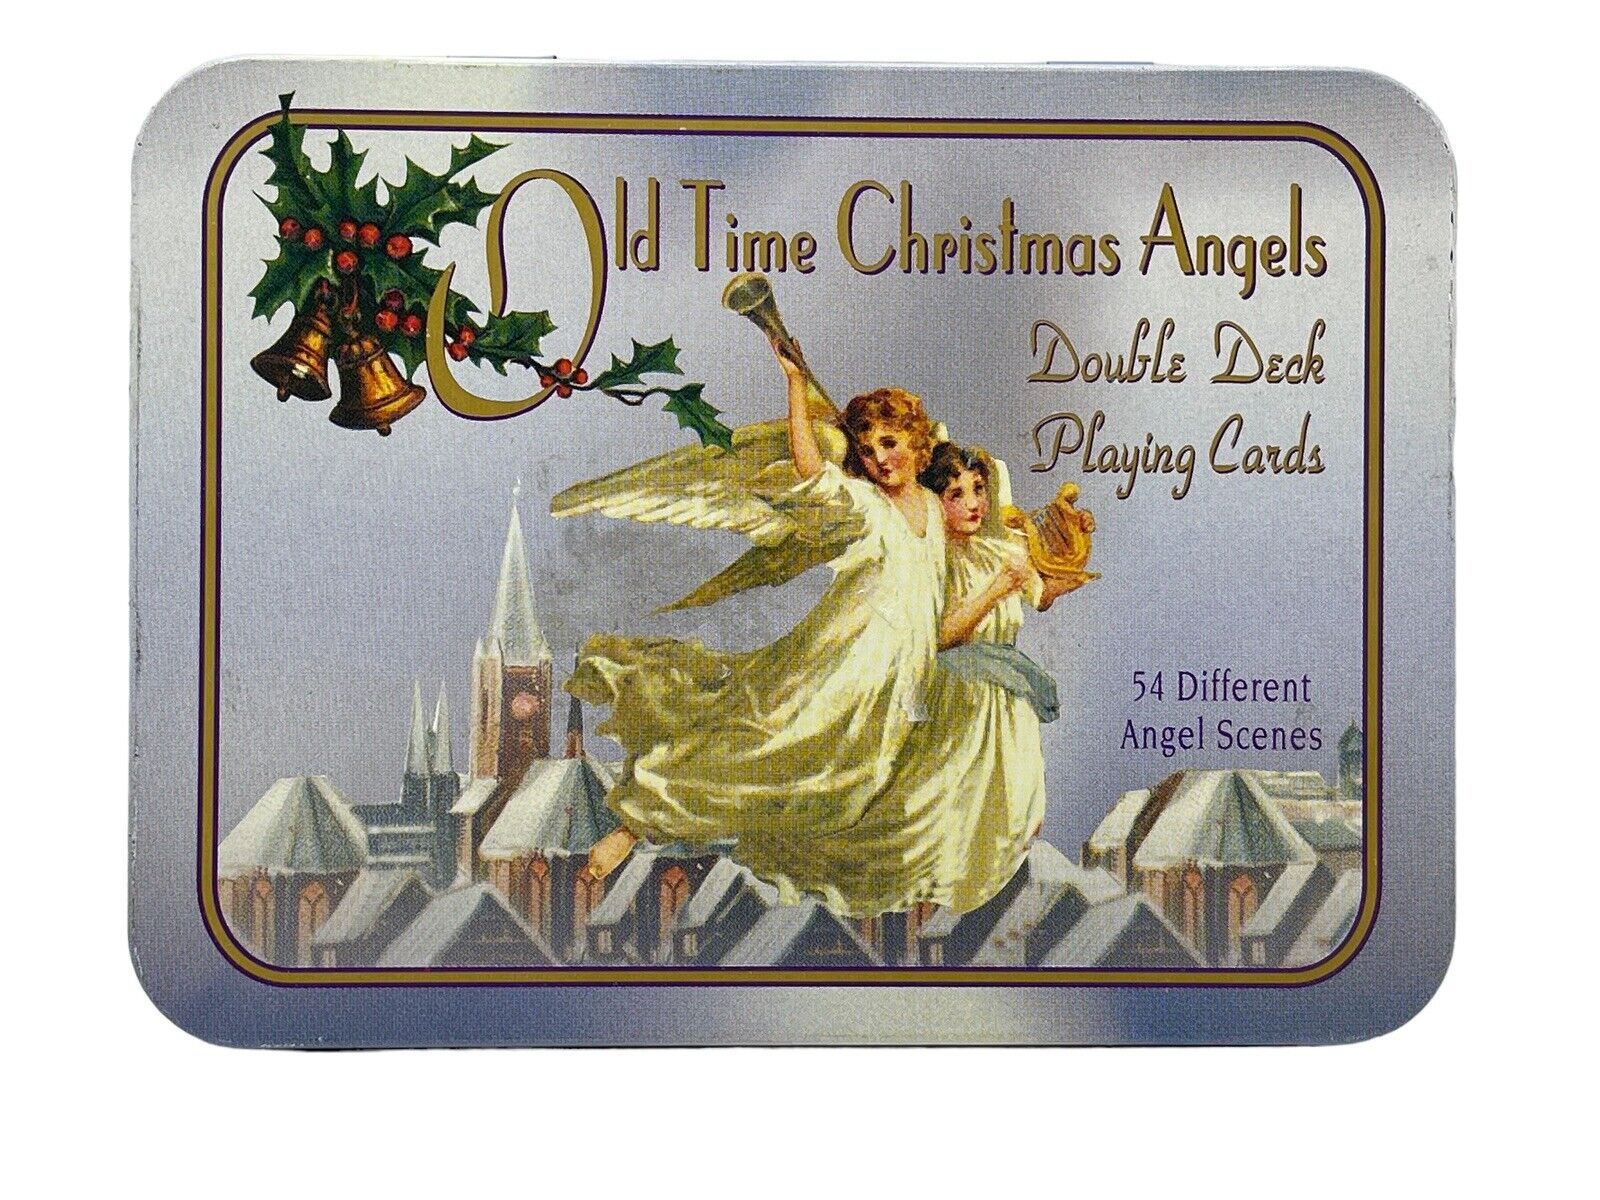 New Sealed 1996 U.S. Games Systems Christmas Angels Double Deck Playing Cards